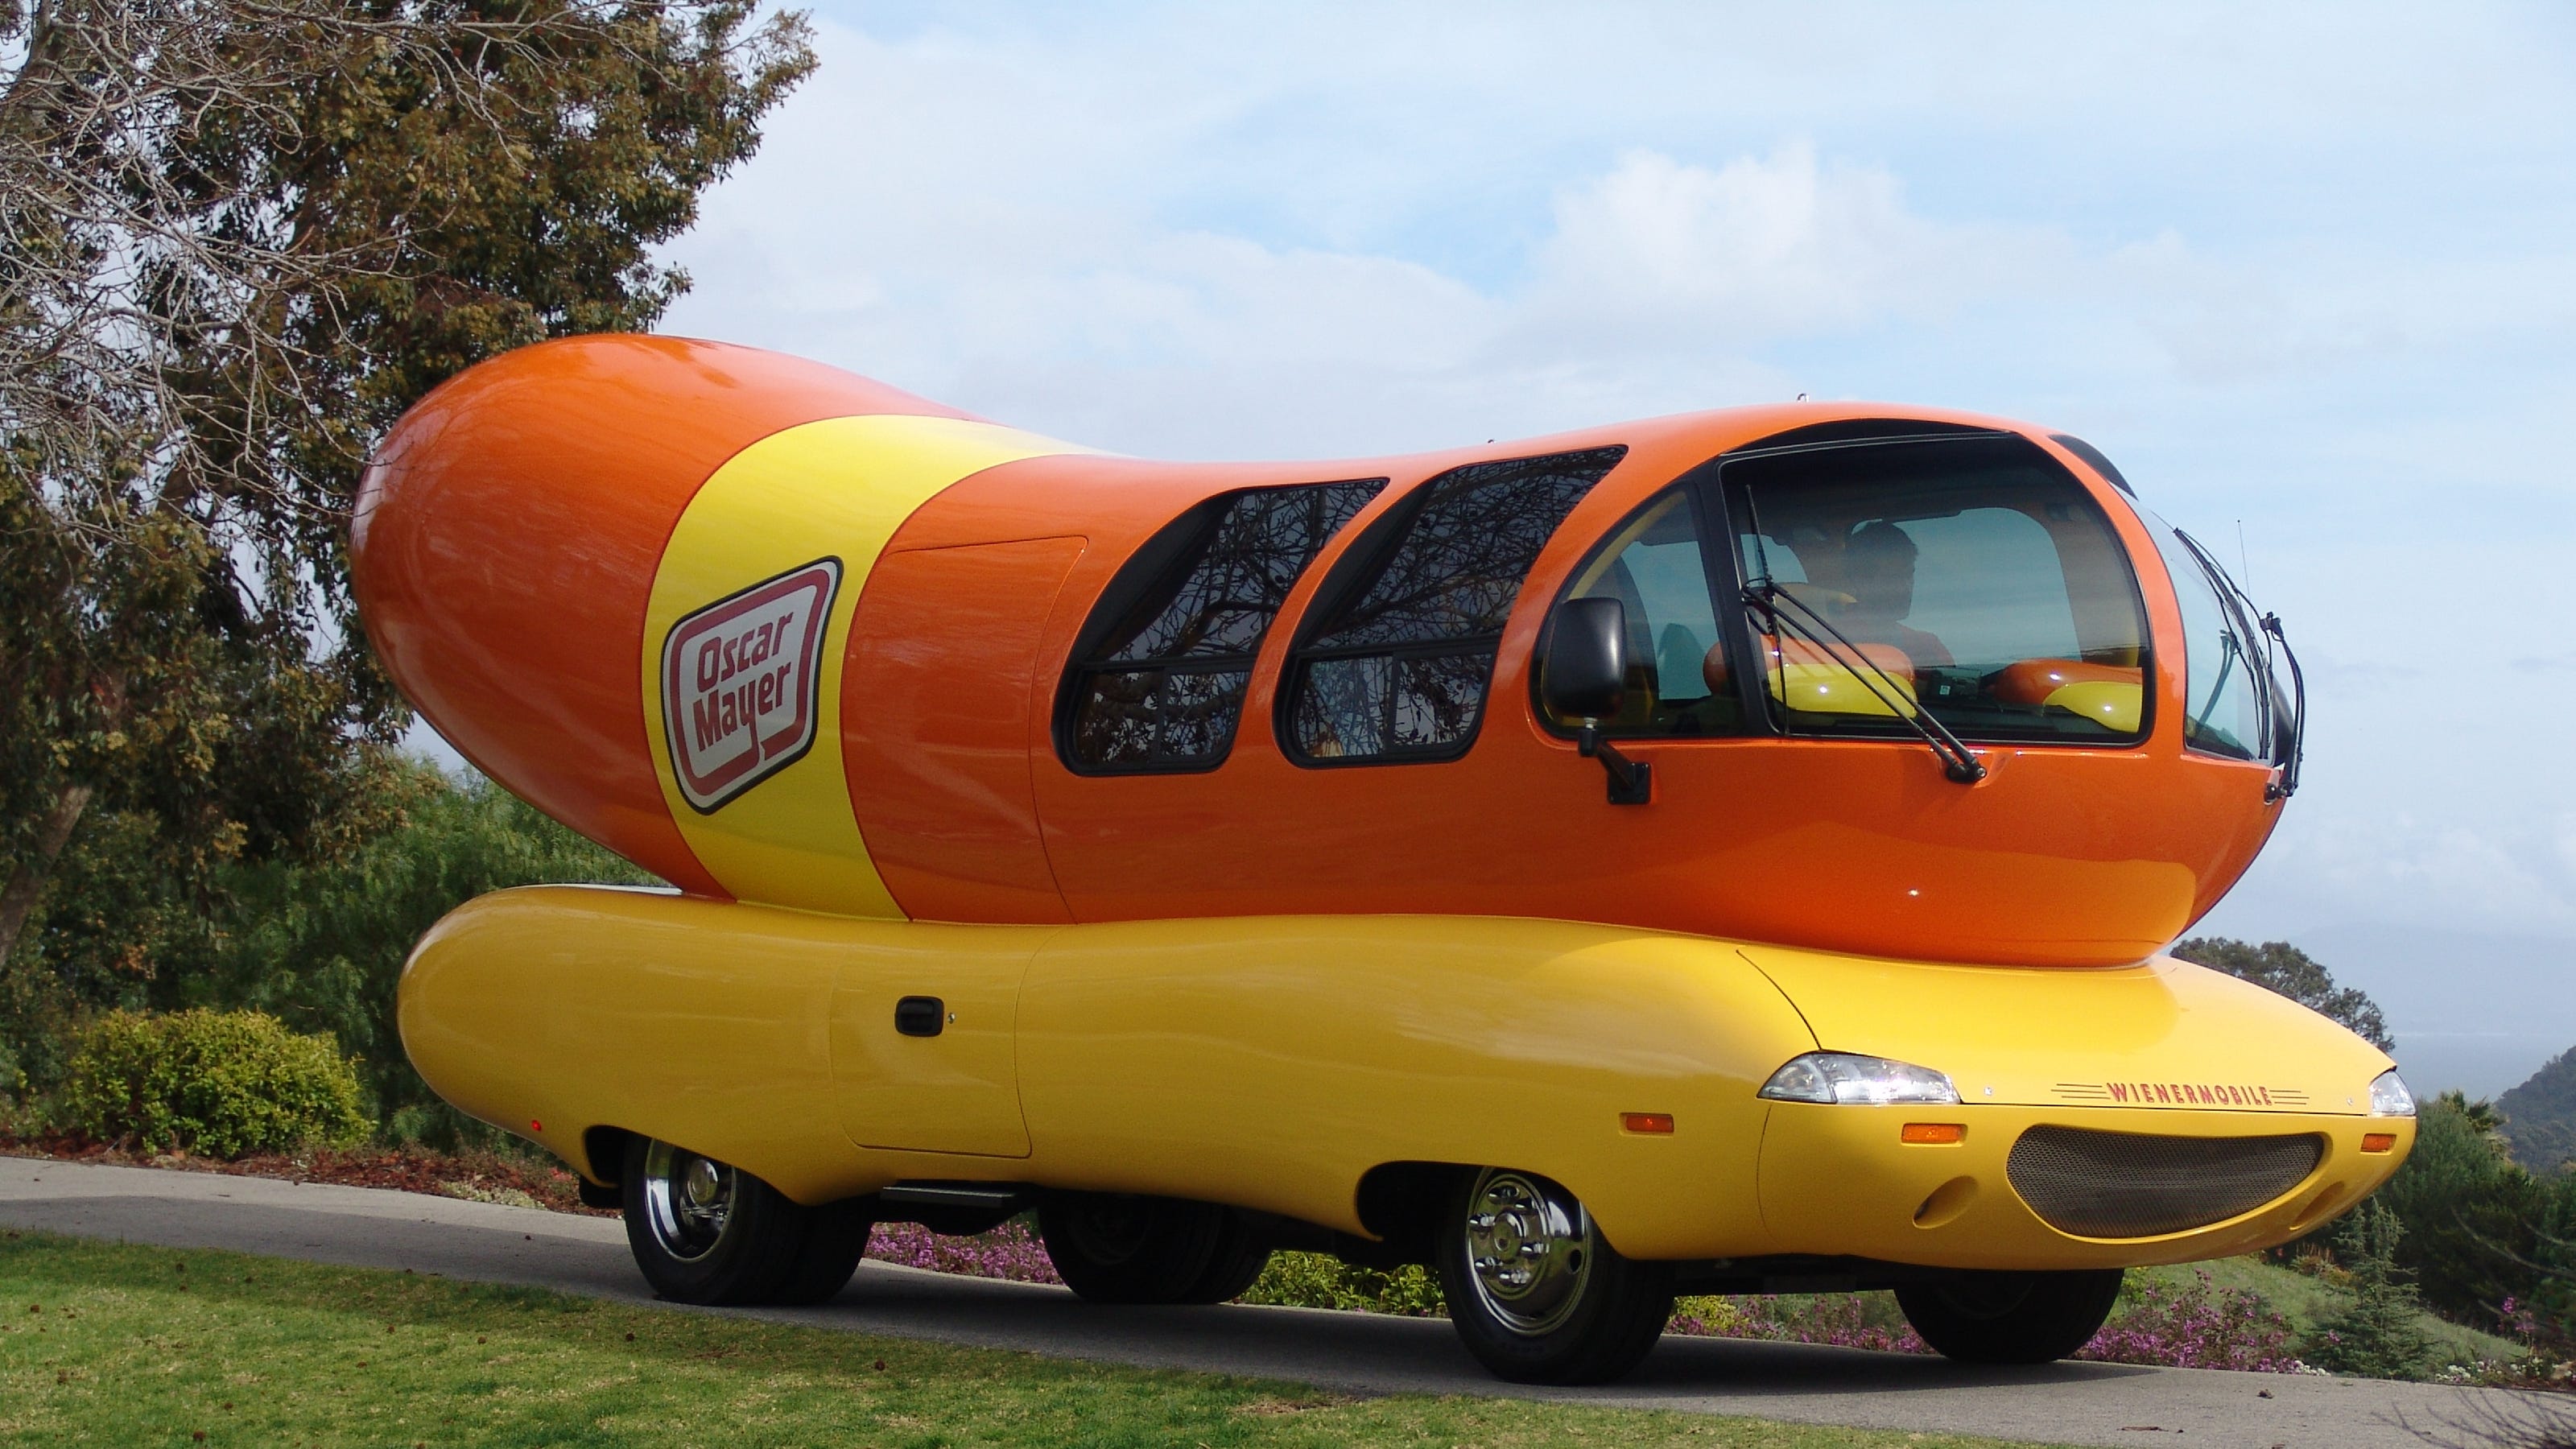 Oscar Mayer Airbnb Wienermobile Available To Rent And Sleep Inside